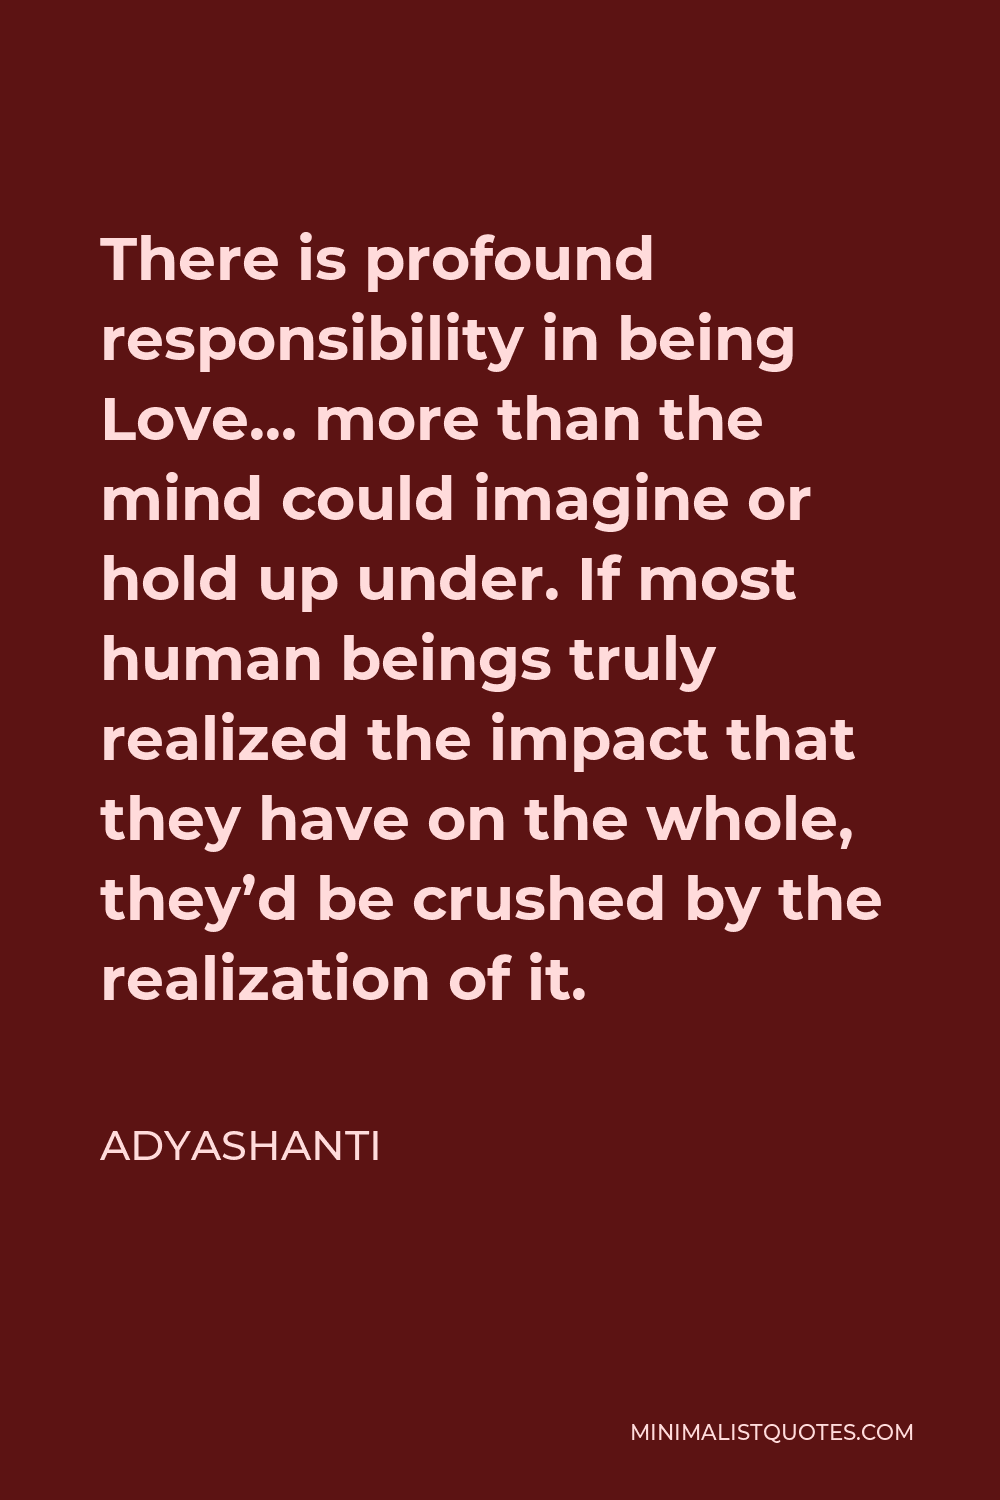 Adyashanti Quote - There is profound responsibility in being Love… more than the mind could imagine or hold up under. If most human beings truly realized the impact that they have on the whole, they’d be crushed by the realization of it.